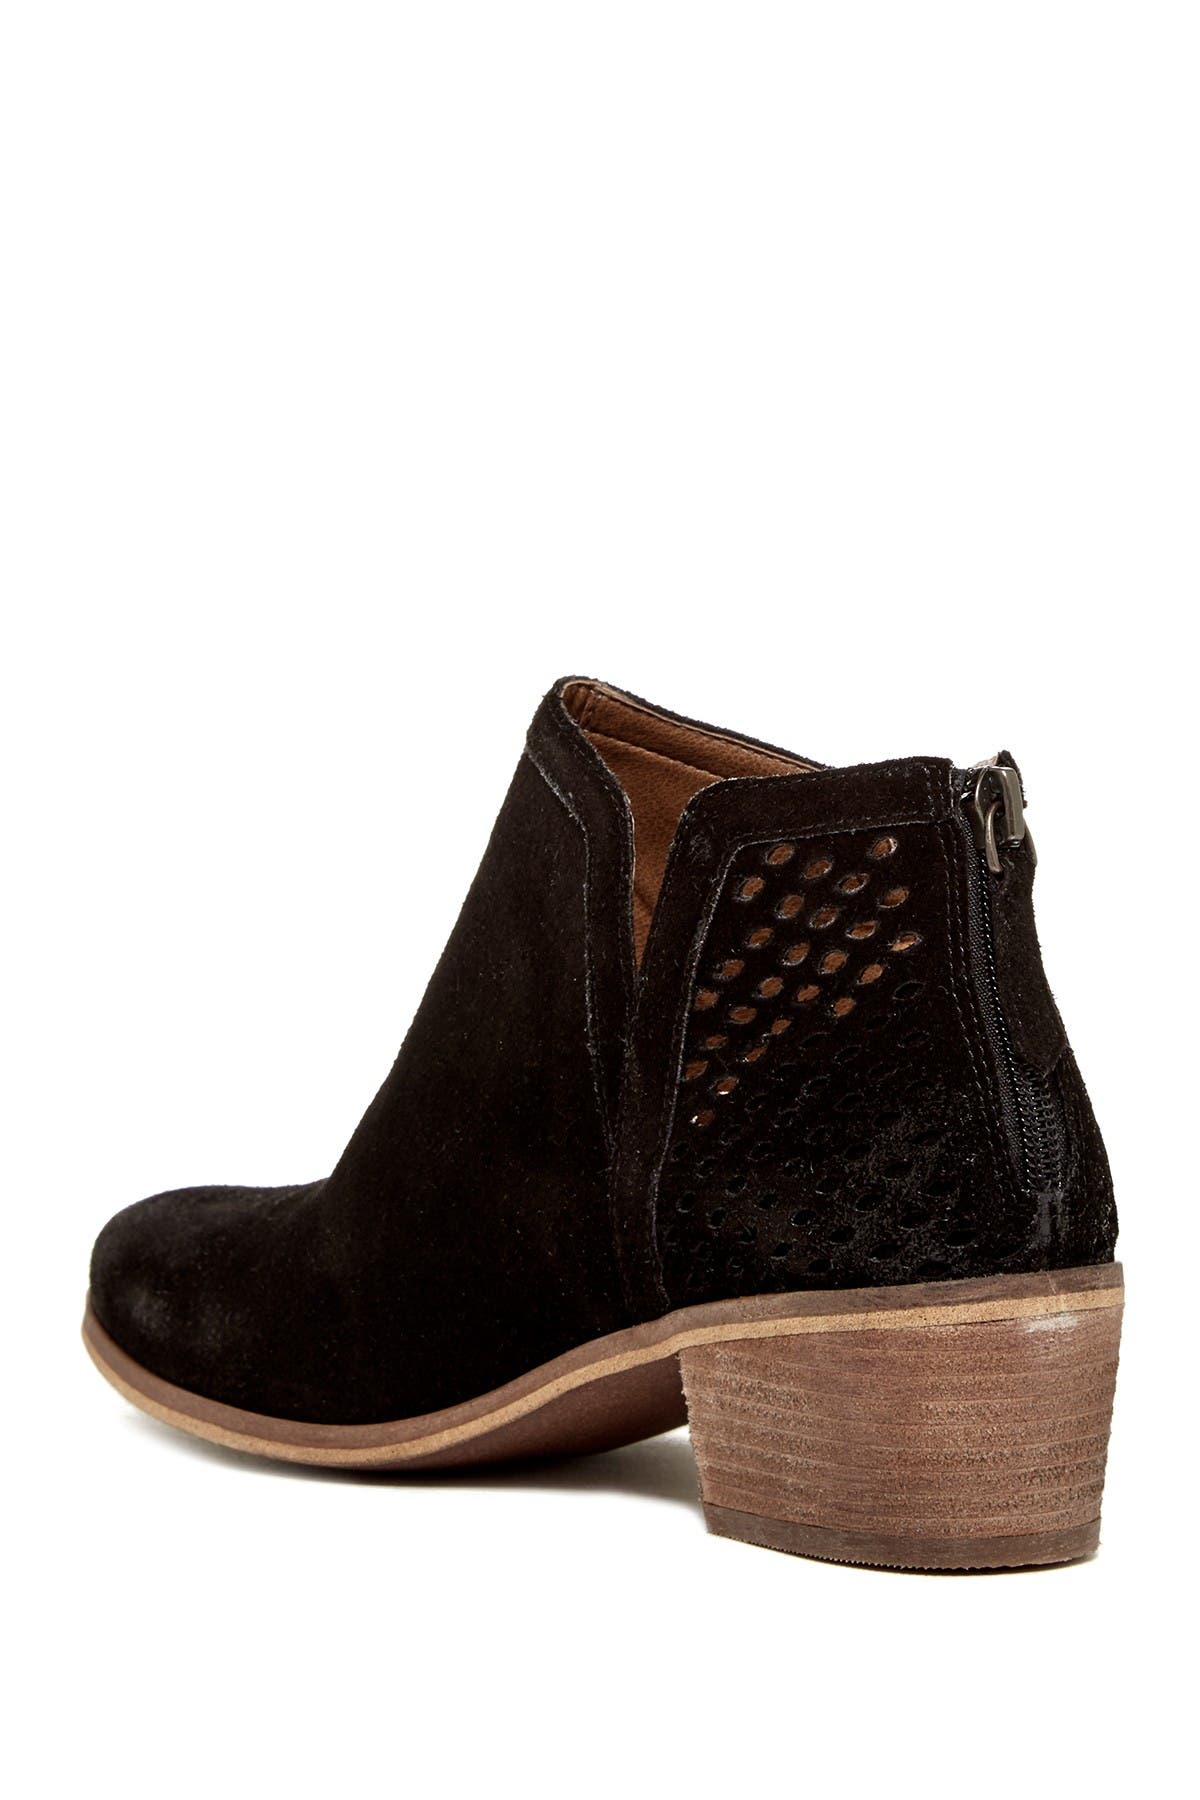 susina ridlee suede bootie